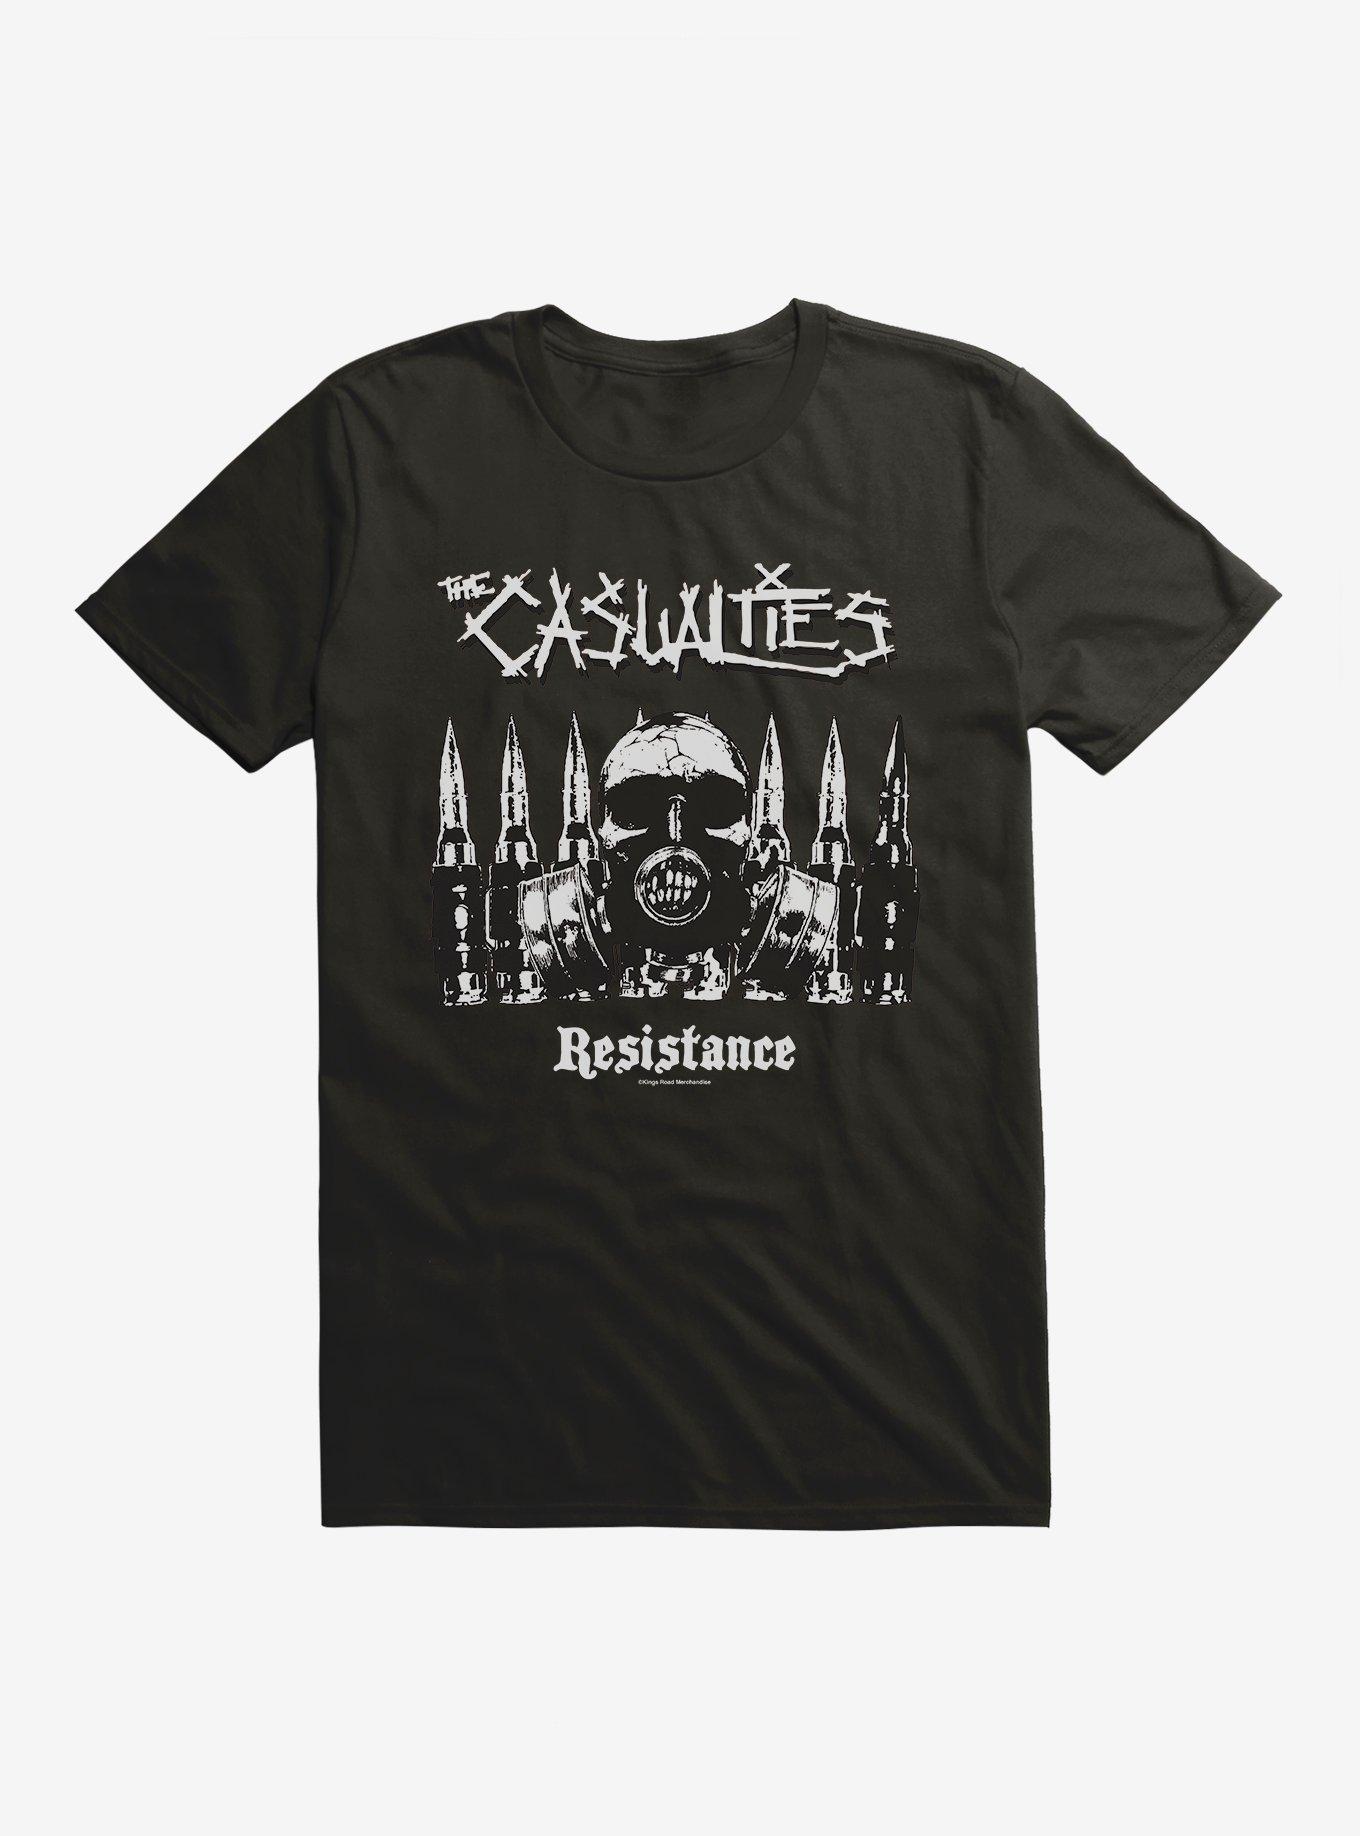 The Casualties Resistance T-Shirt